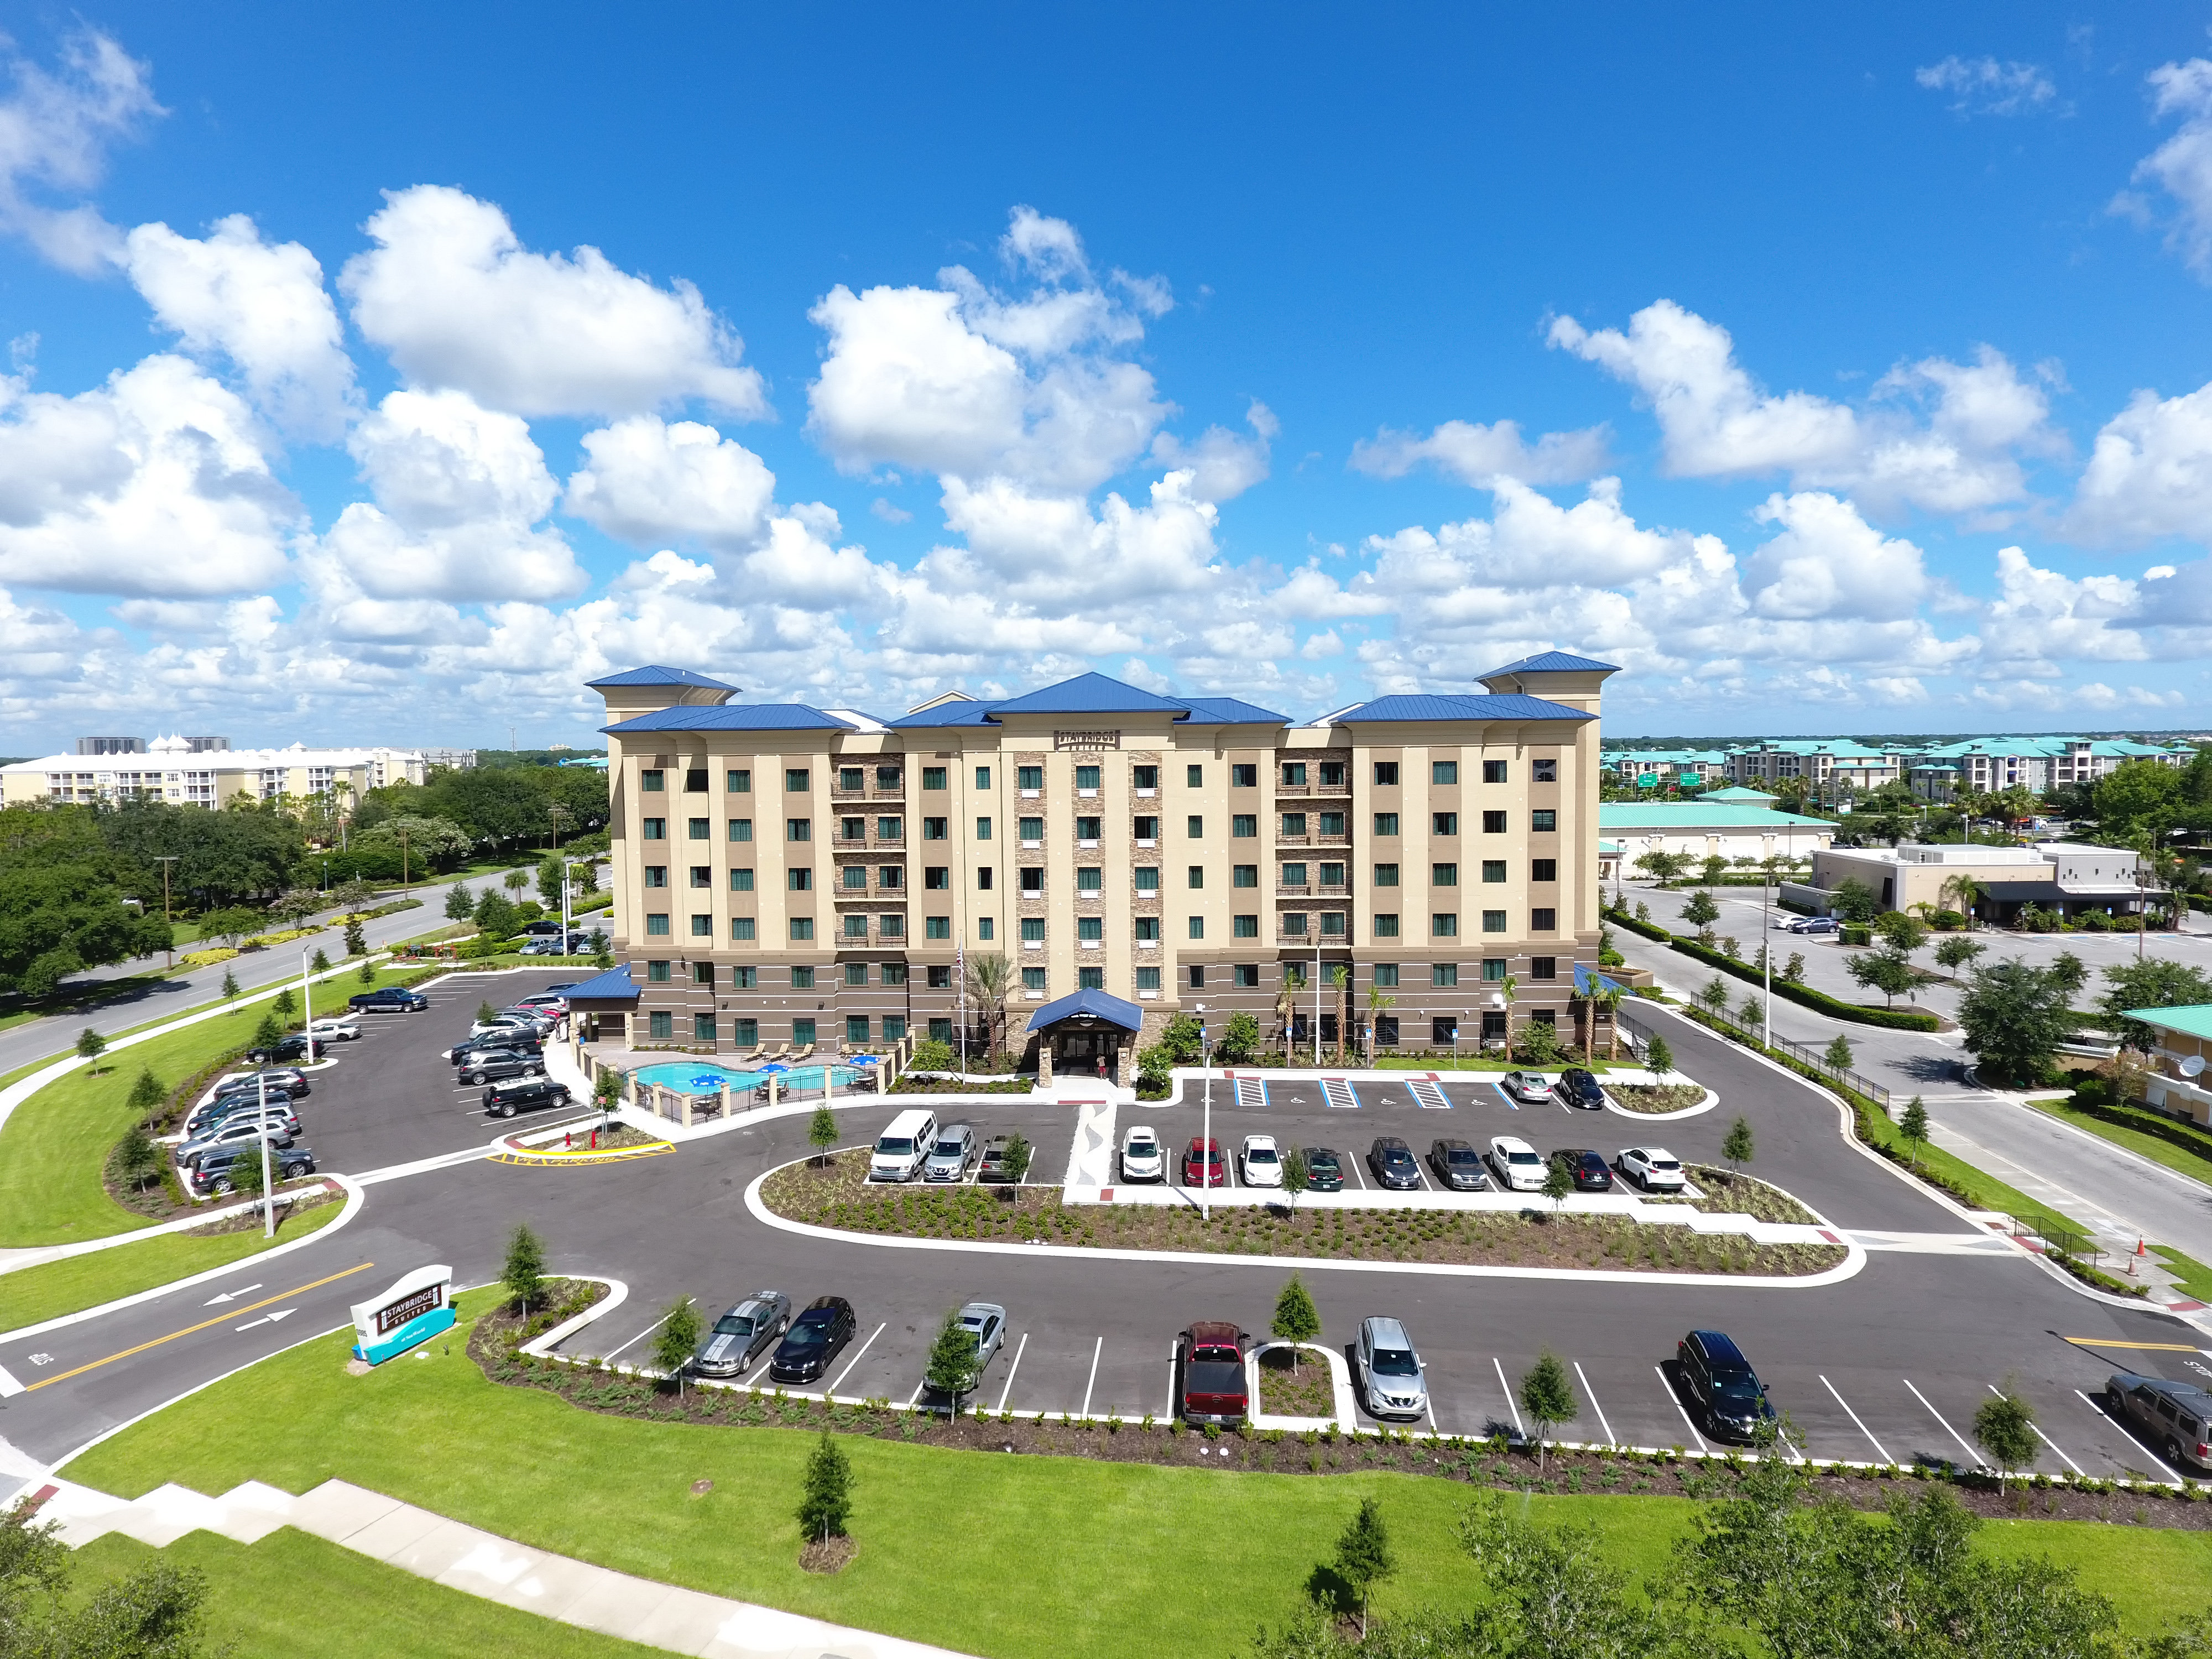 In the heart of Orlando the Staybridge Suites Orlando at SeaWorld